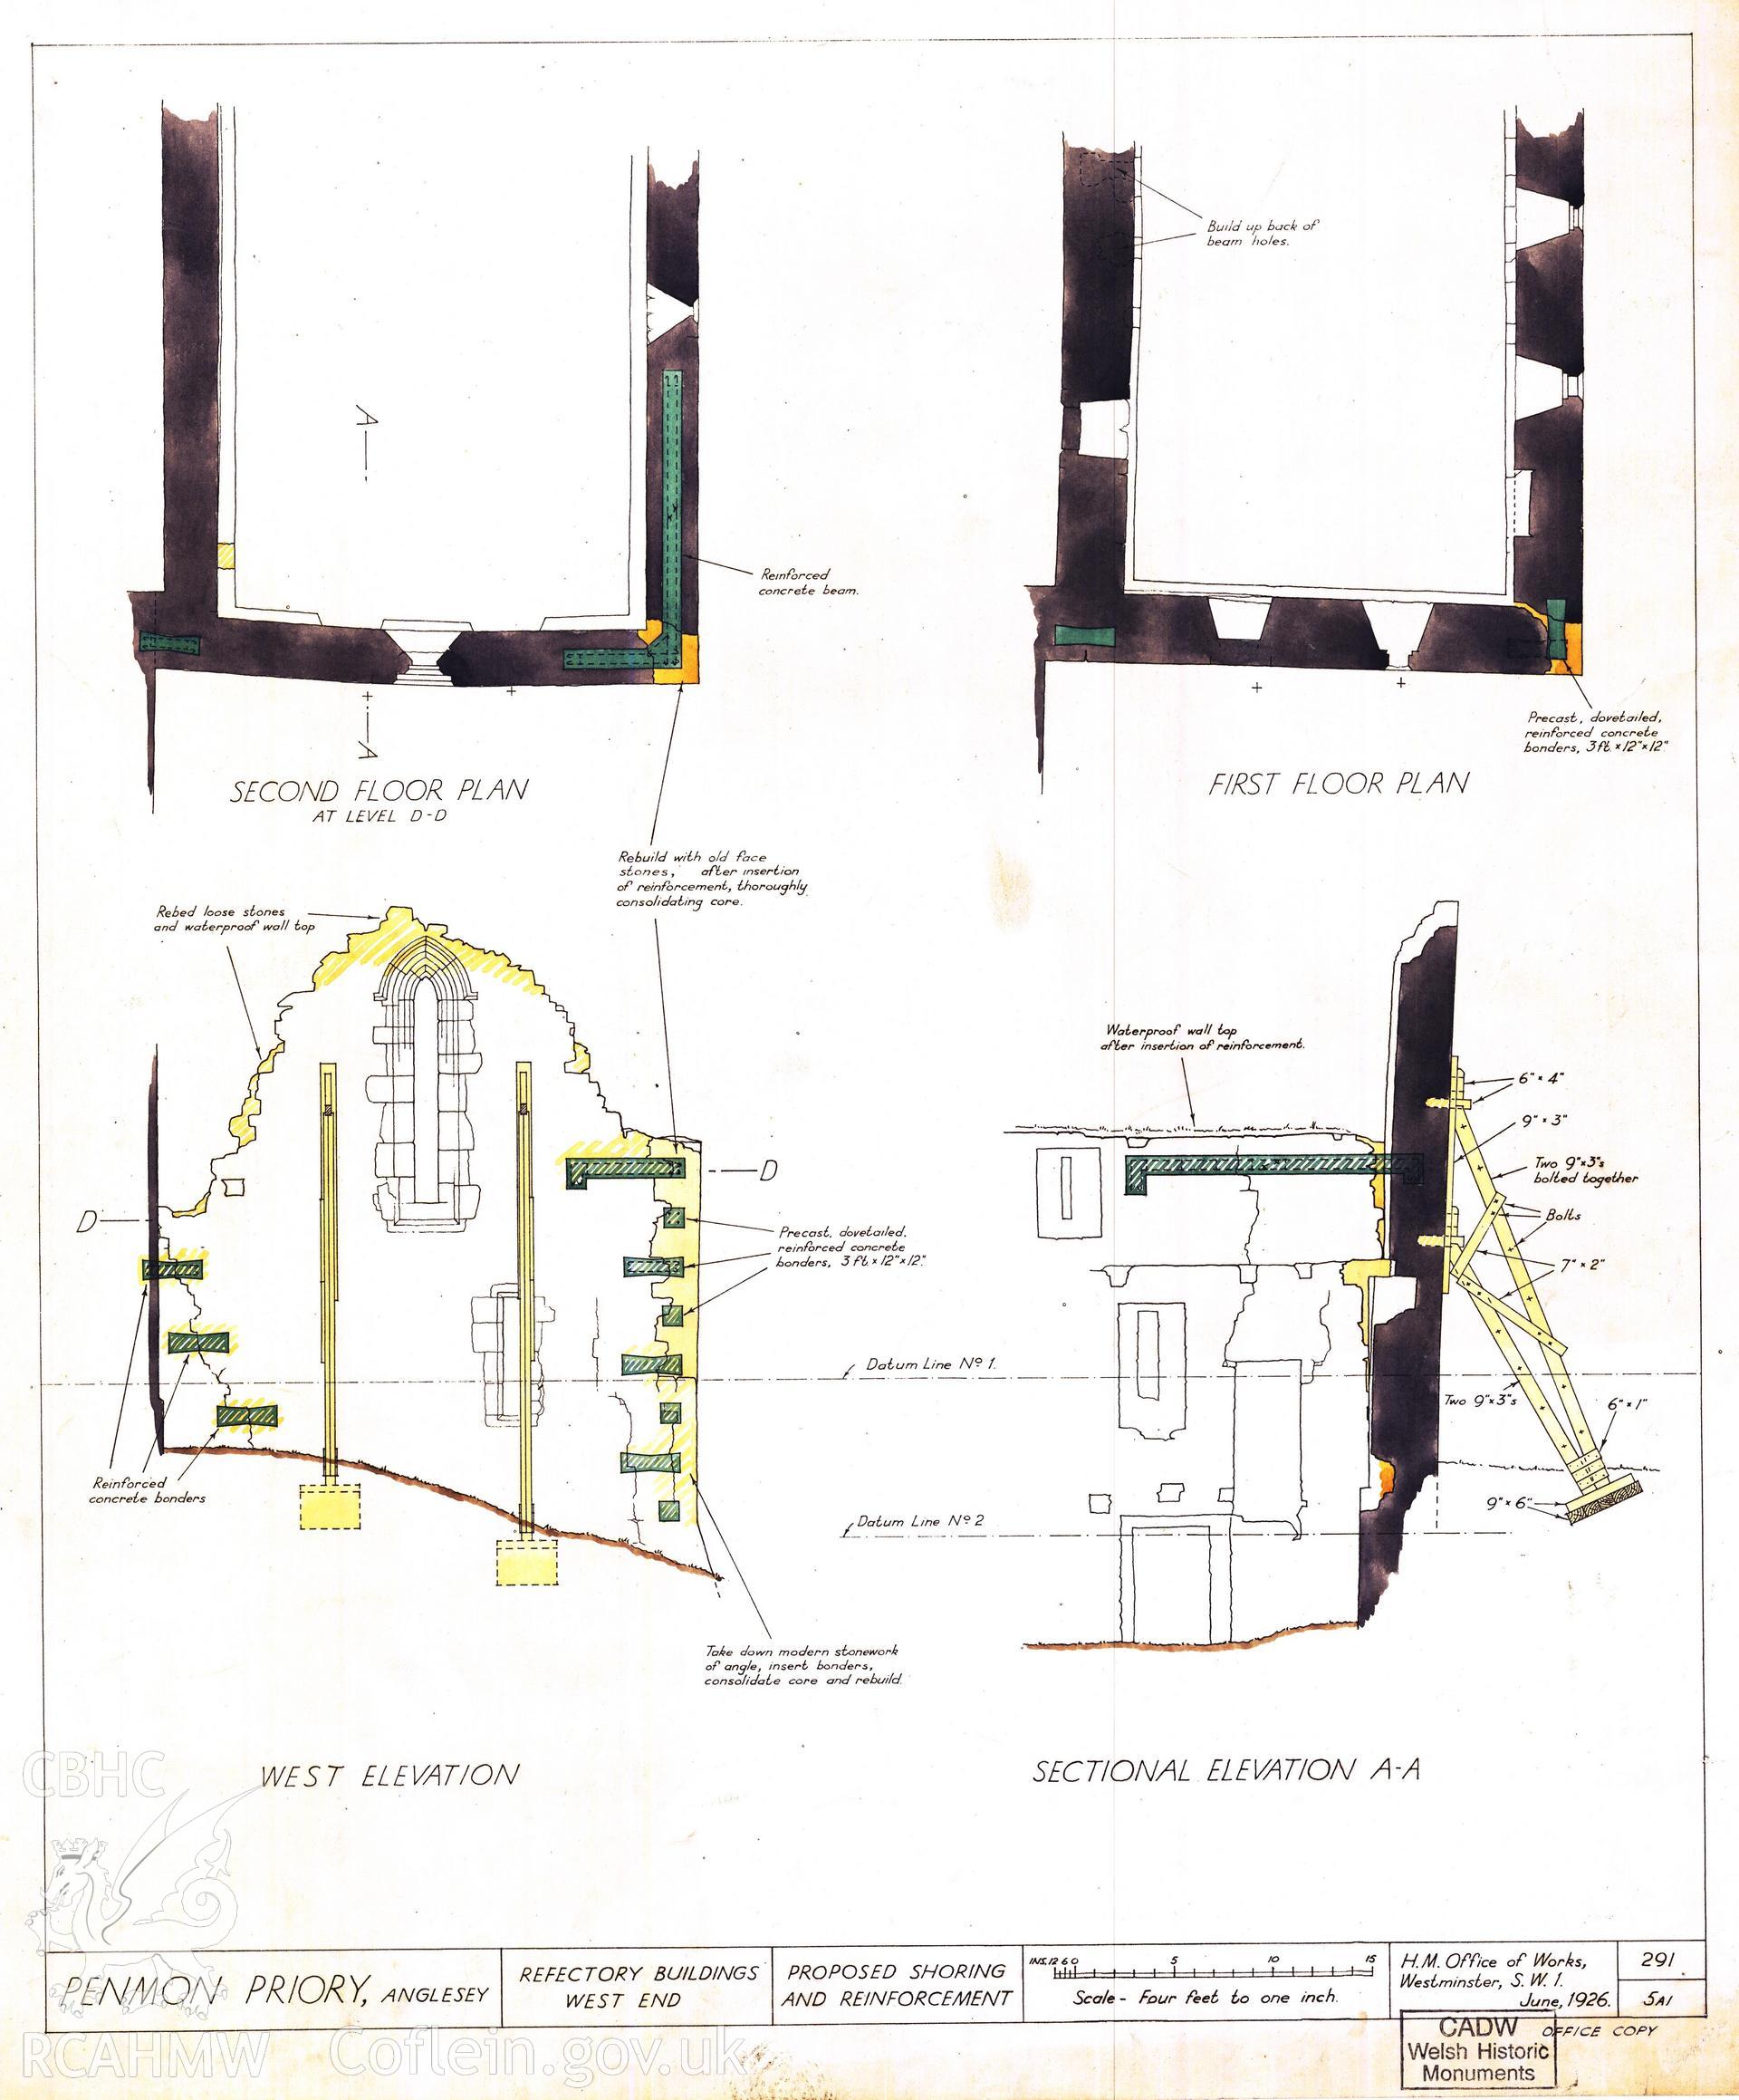 Cadw guardianship monument drawing of Penmon Priory. Refectory, plans &c for repairs. Cadw Ref. No:291/5a1. Scale 1:48.